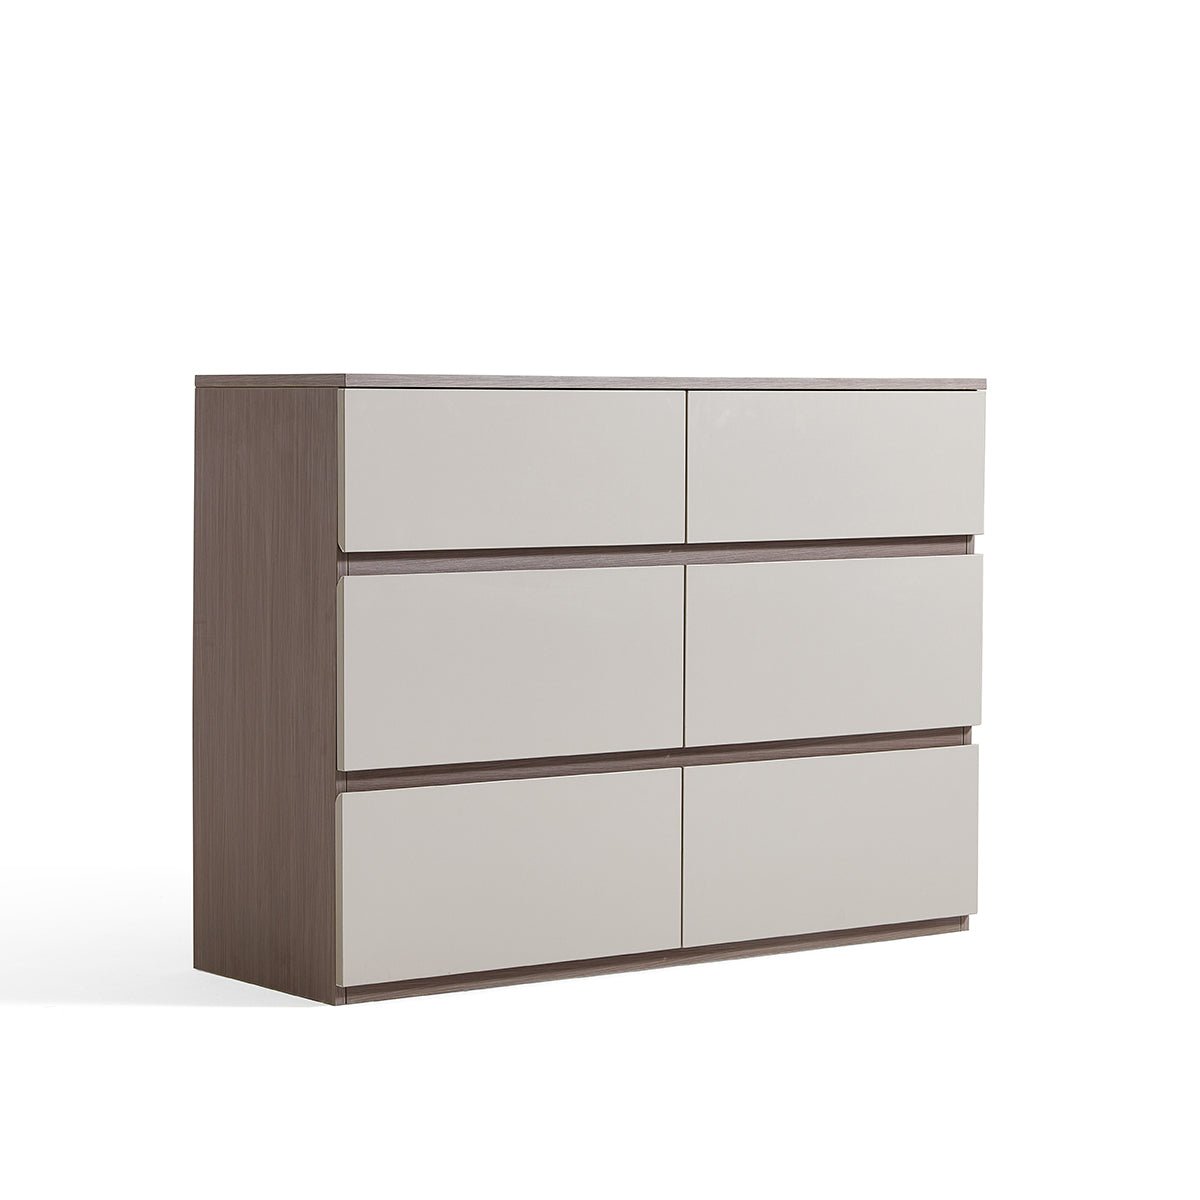 Cappuccino Taupe Chest of 6 Drawers - 0cm